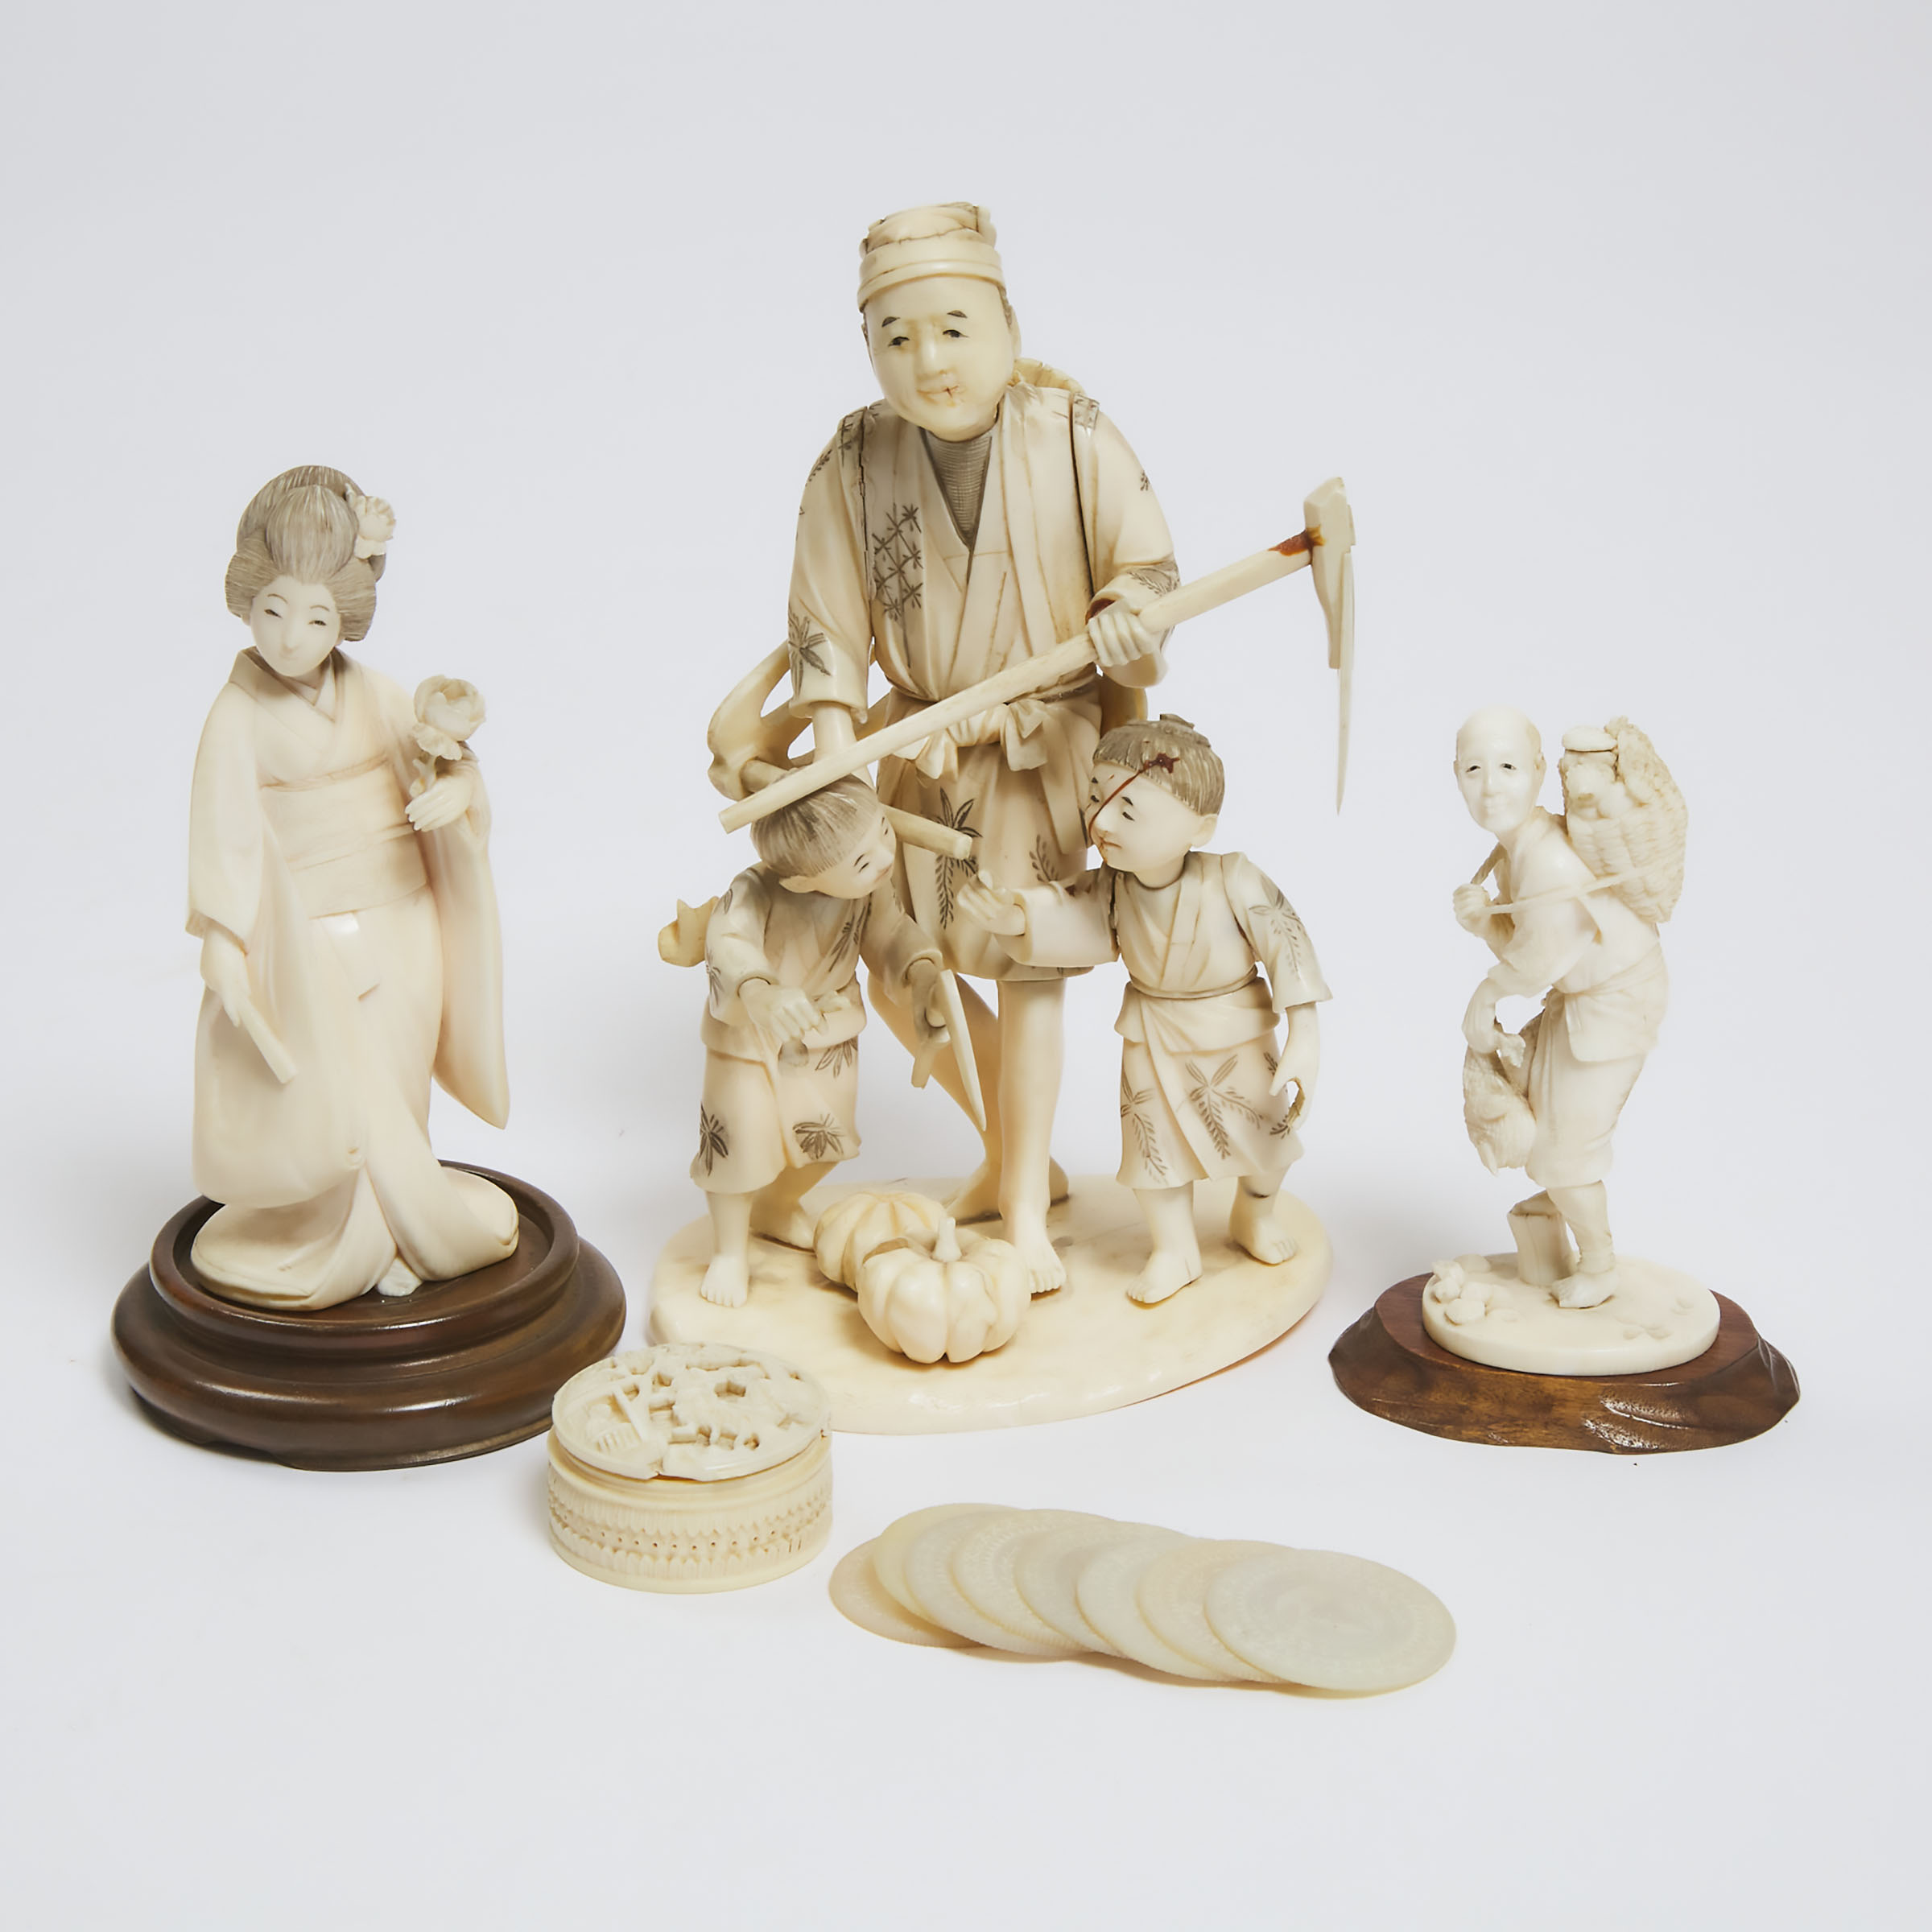 A Group of Three Ivory Okimono, Together With a Box and Counters, Late 19th/Early 20th Century